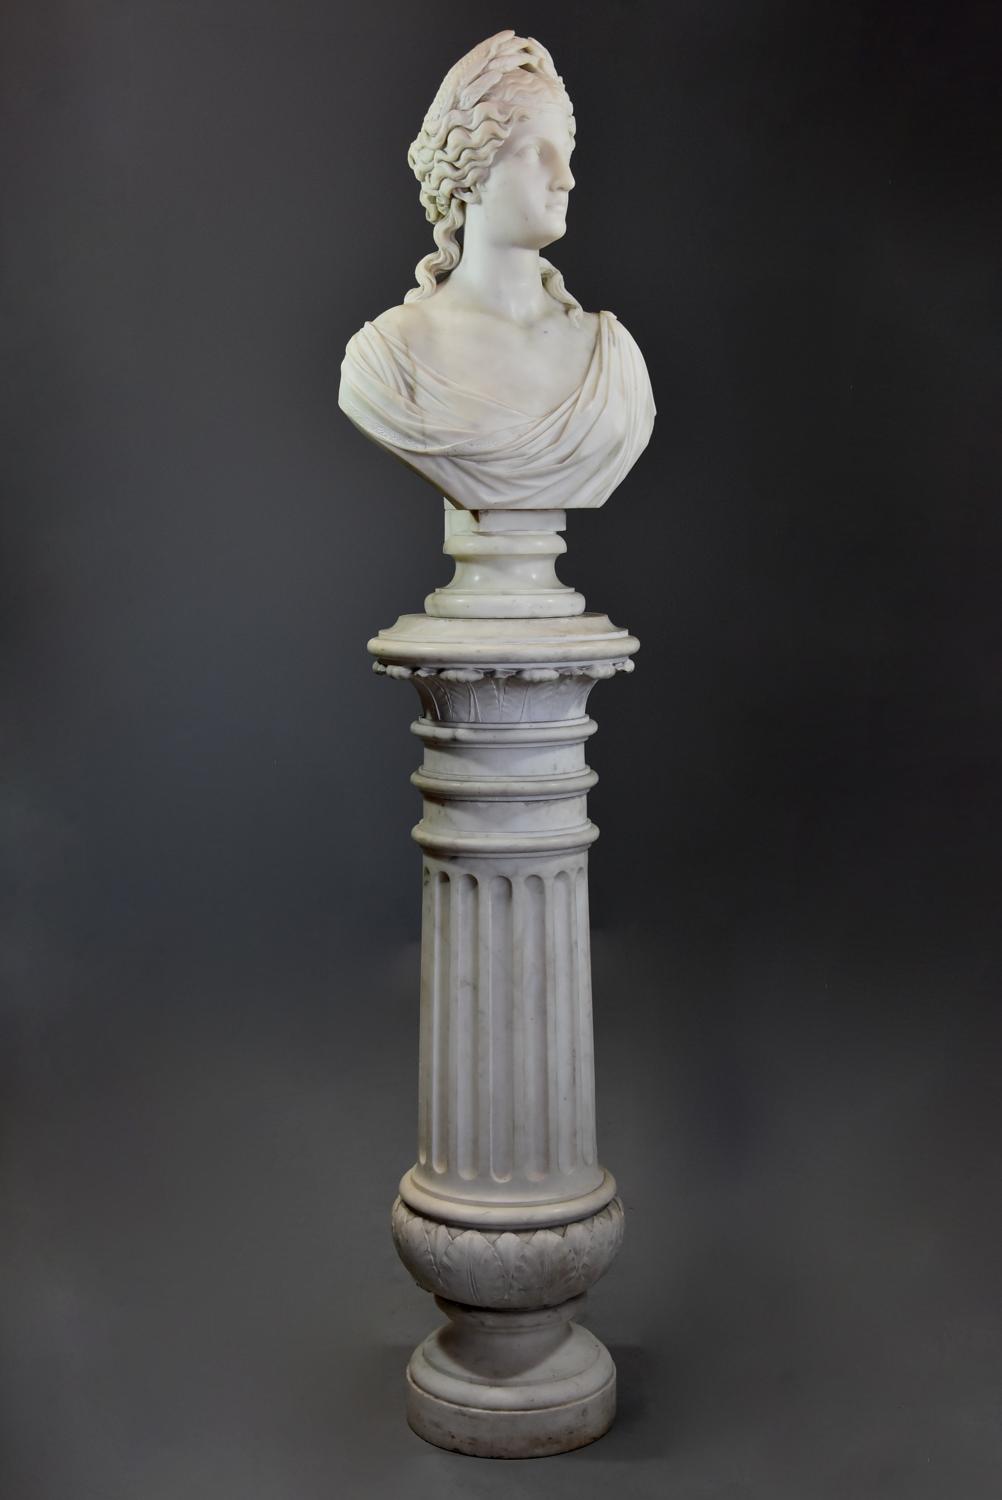 19thc life size marble bust on stand of Ceres signed 'S.KITSON'